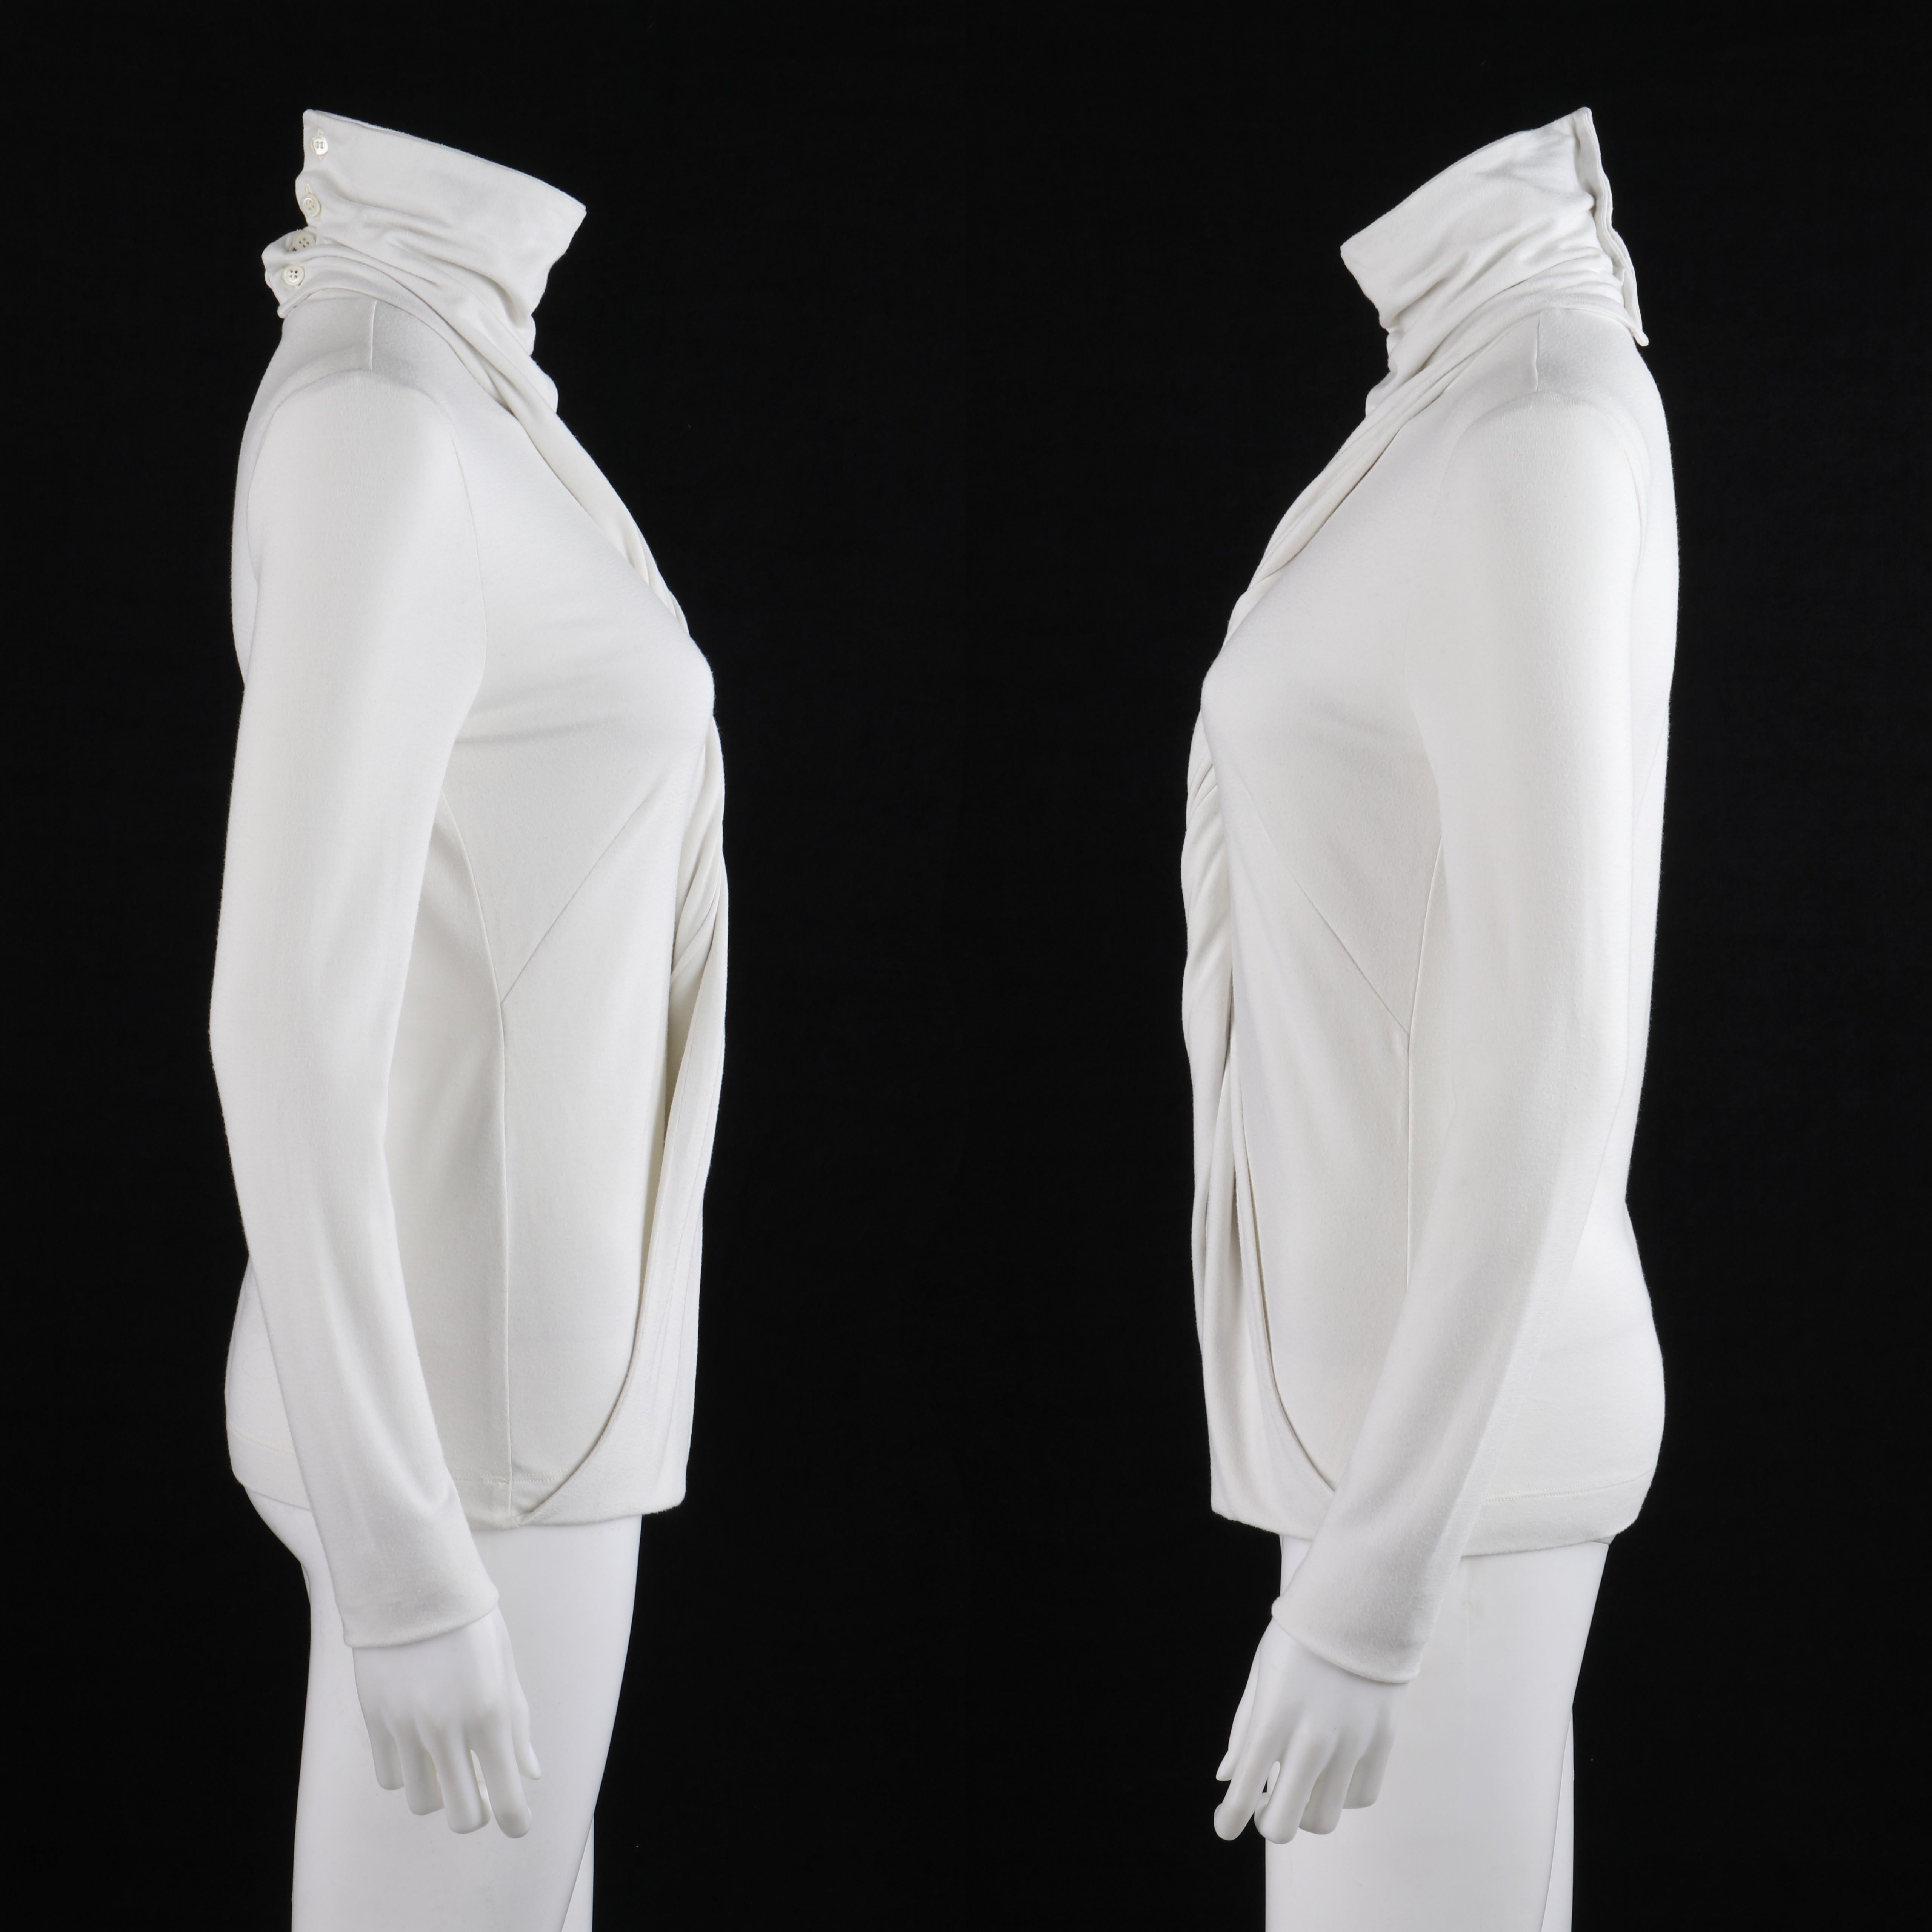 ALEXANDER McQUEEN S/S 2000 “Eye” White Convertible Twisted Front High Neck Top In Good Condition For Sale In Thiensville, WI